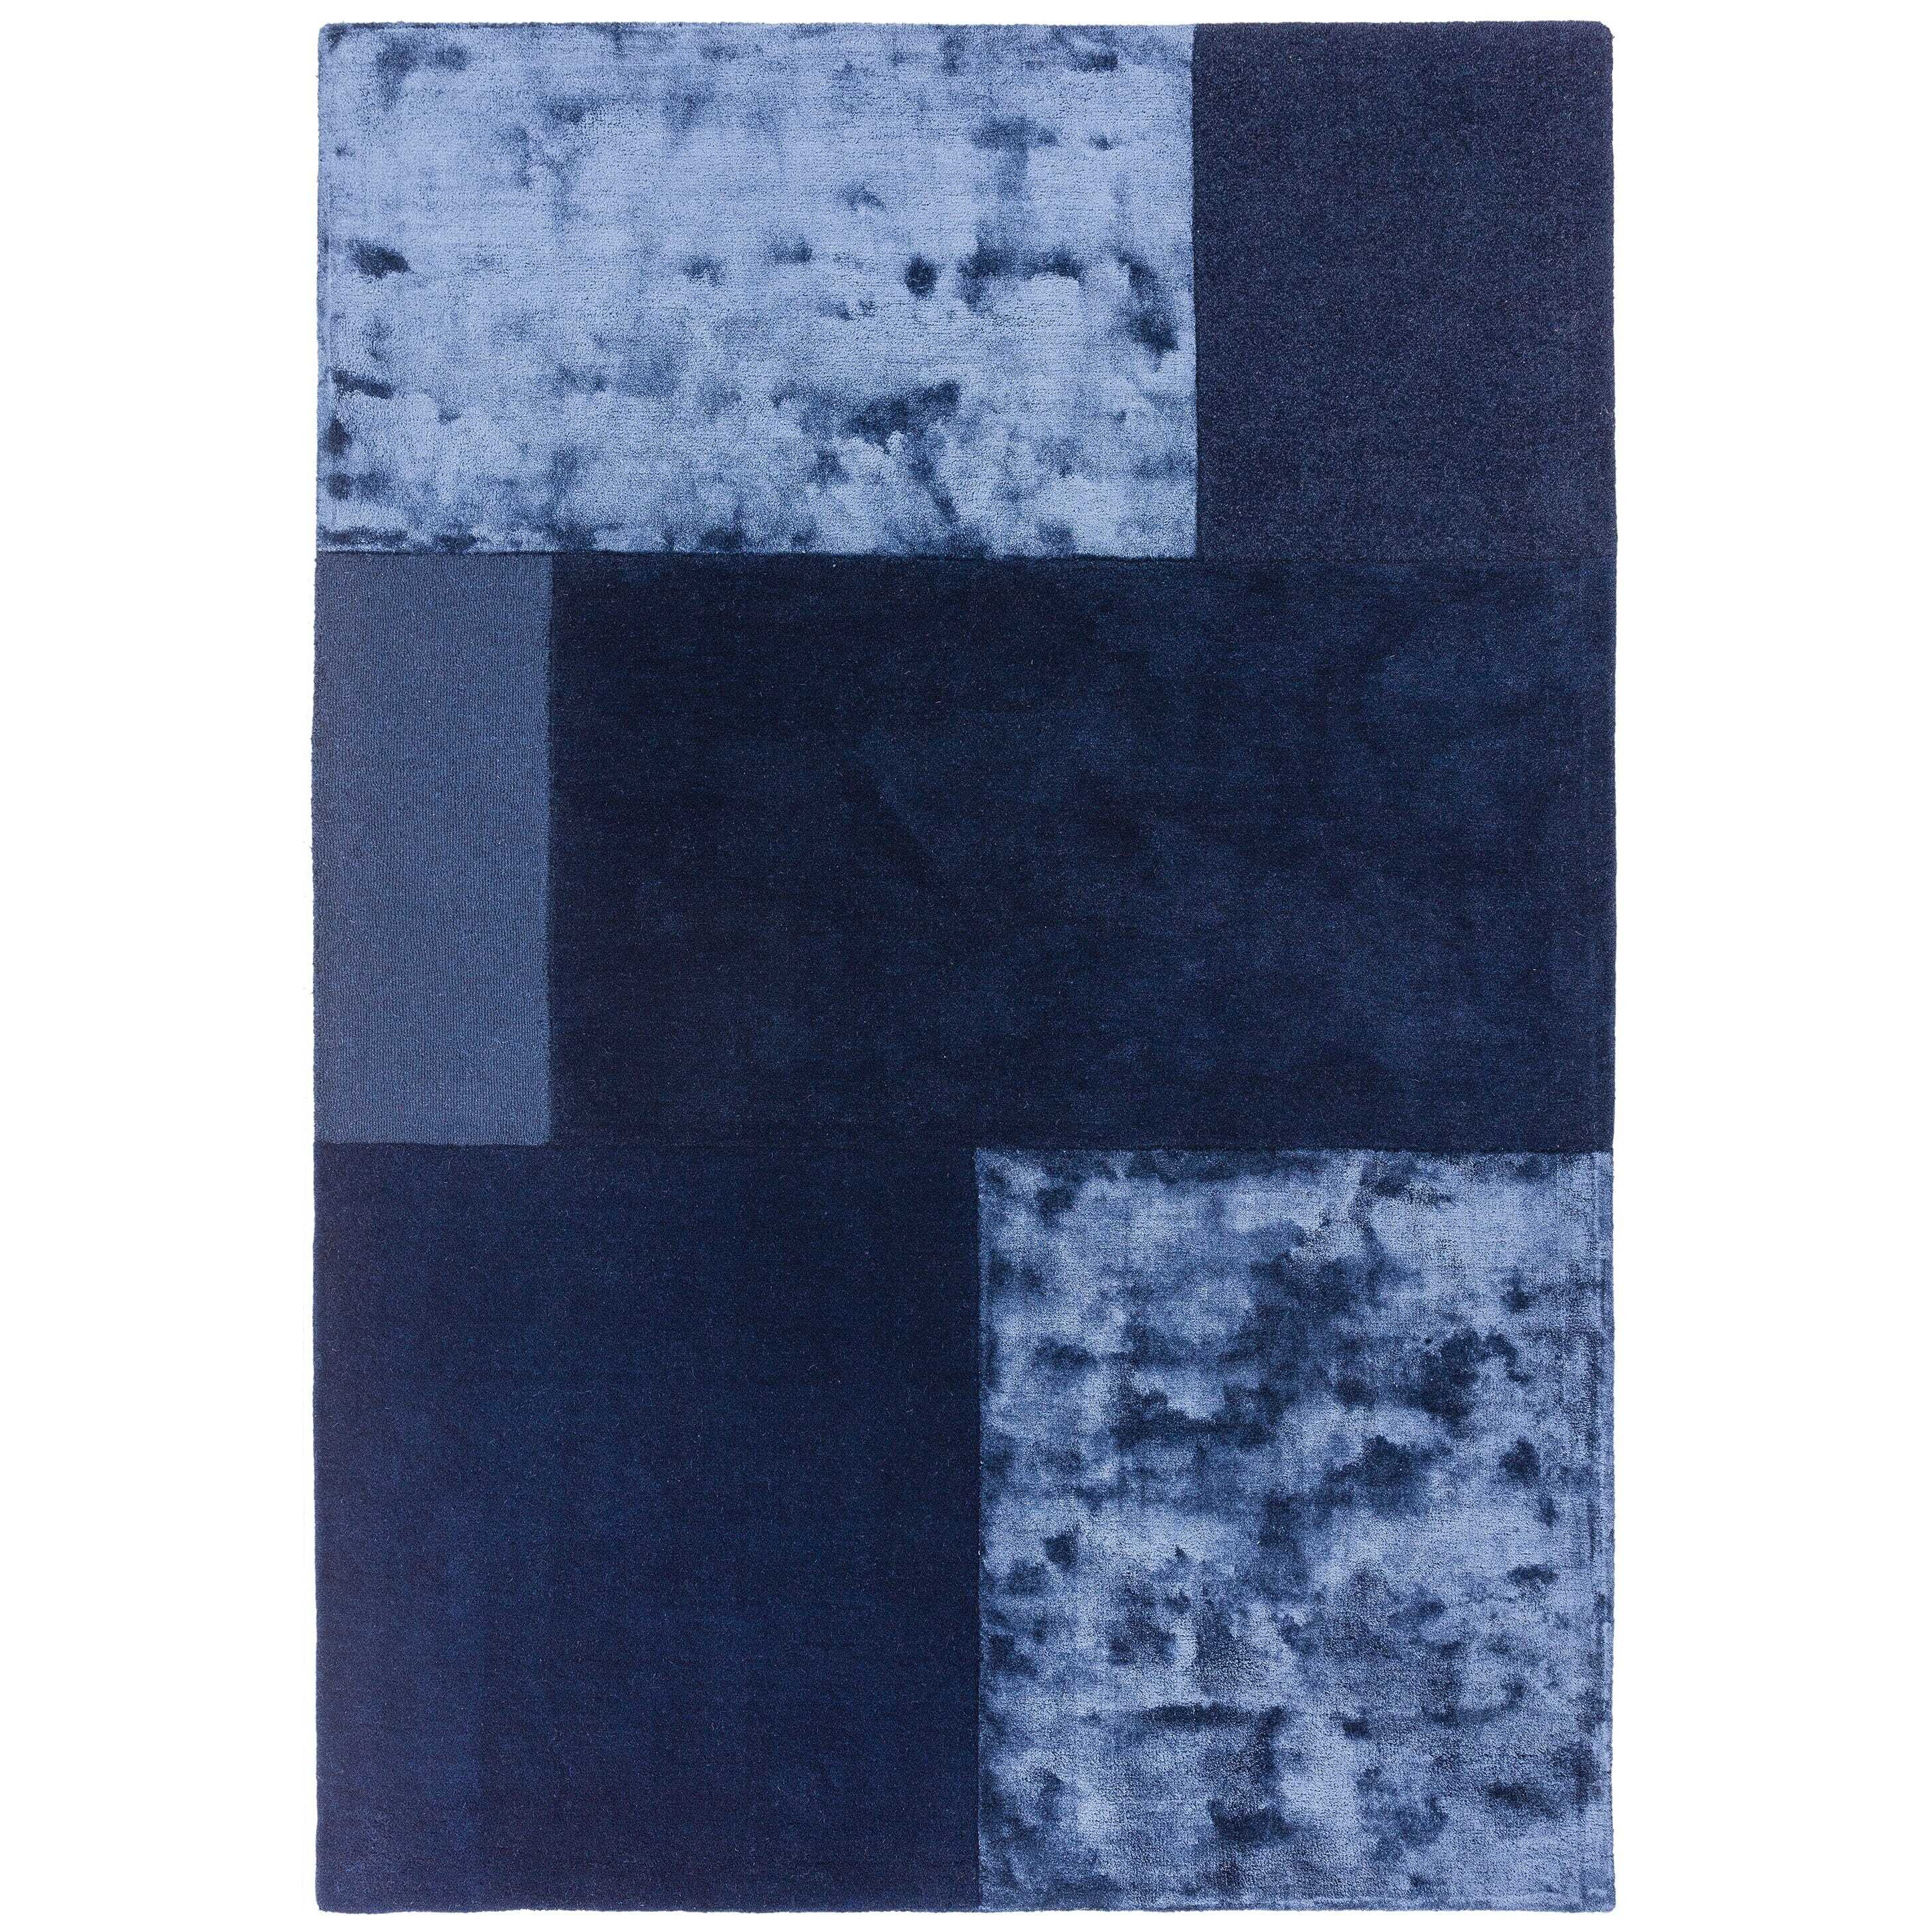 Asiatic Carpets Tate Tonal Textures Hand Tufted Rug Navy - 160 x 230cm - image 1